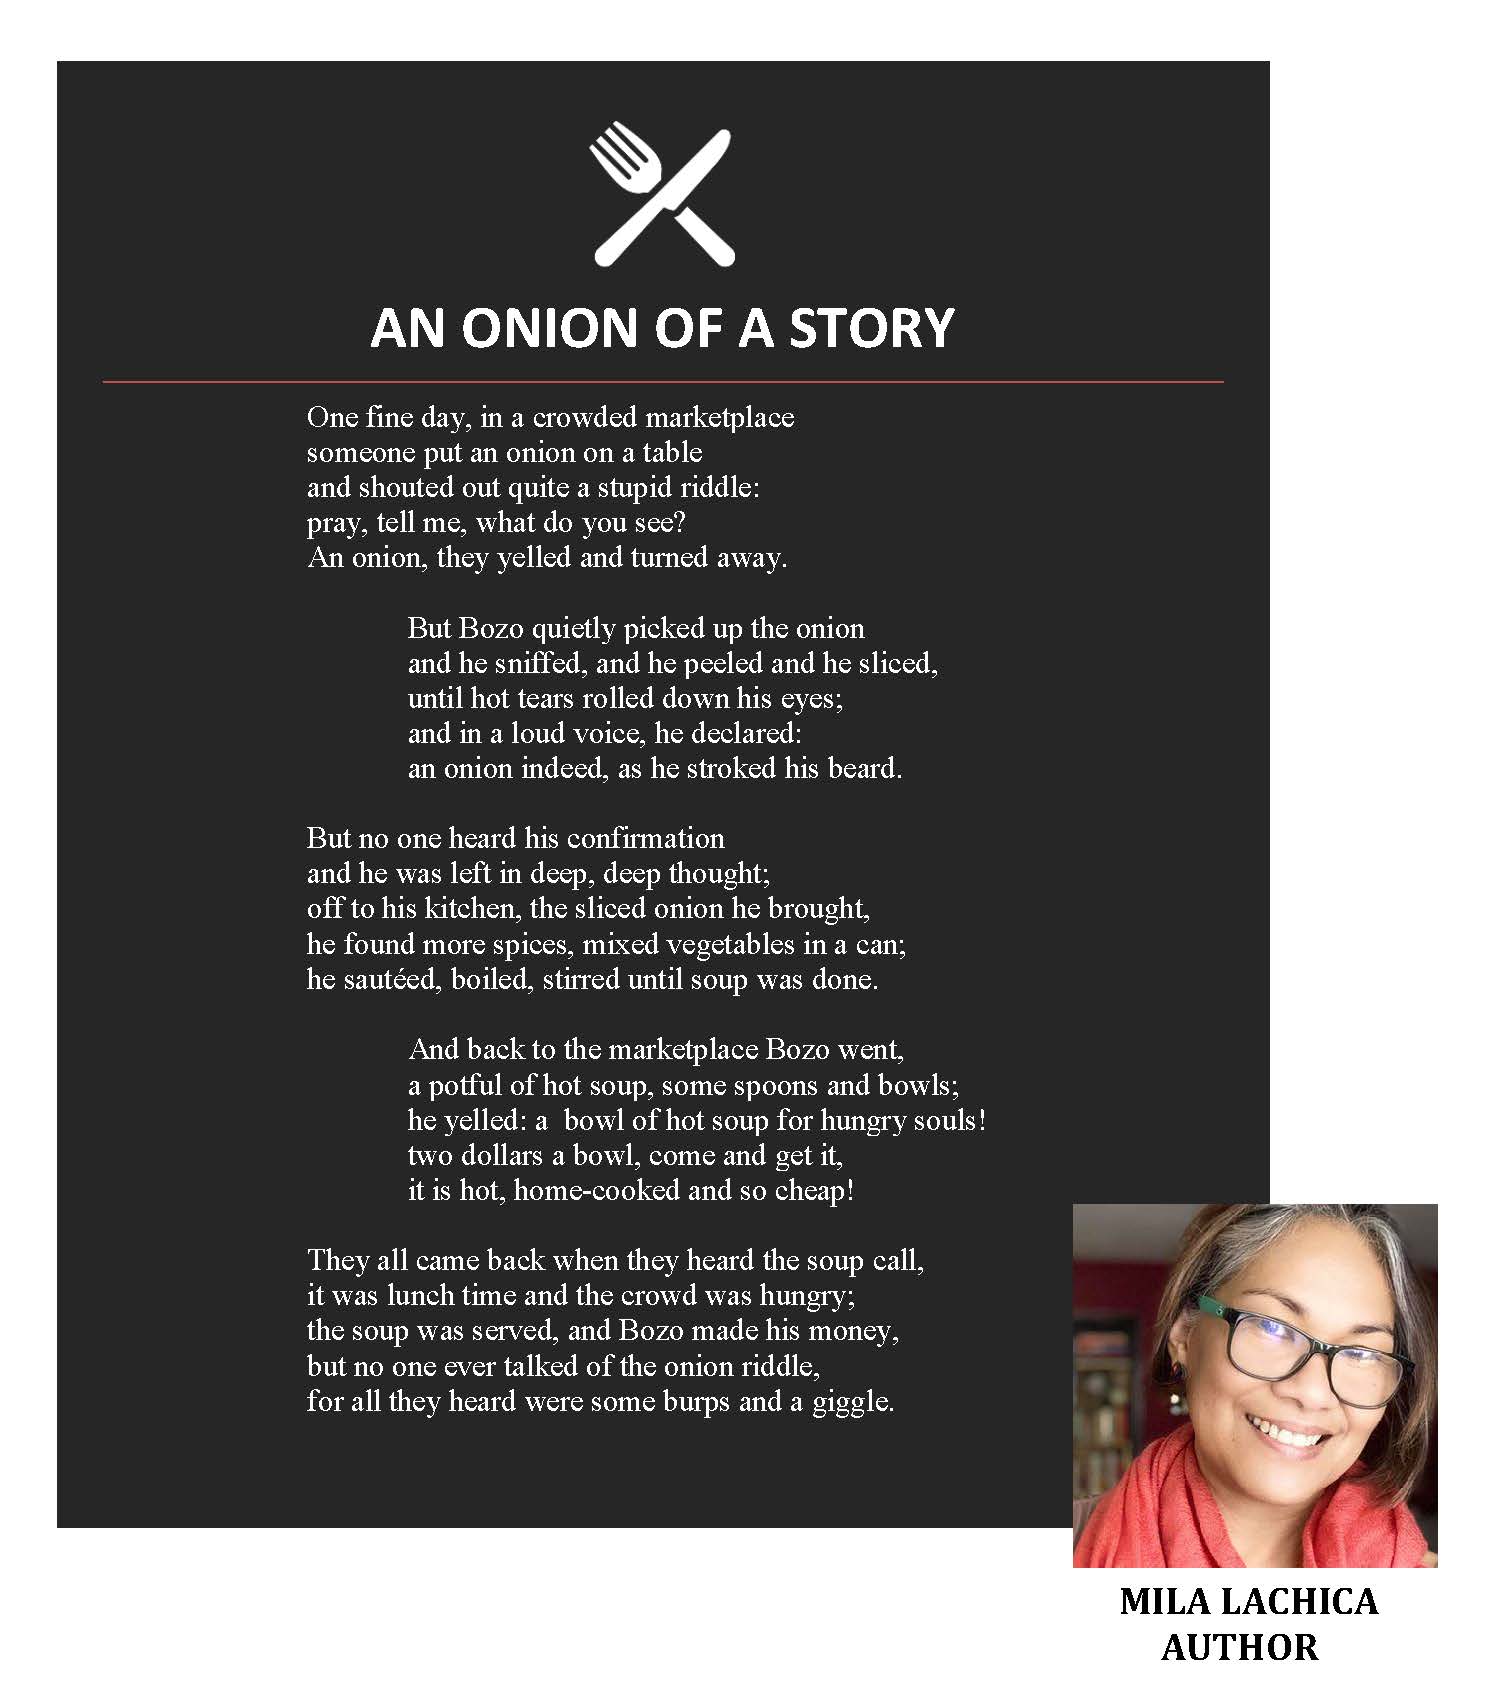 An Onion of a Story_Lachica